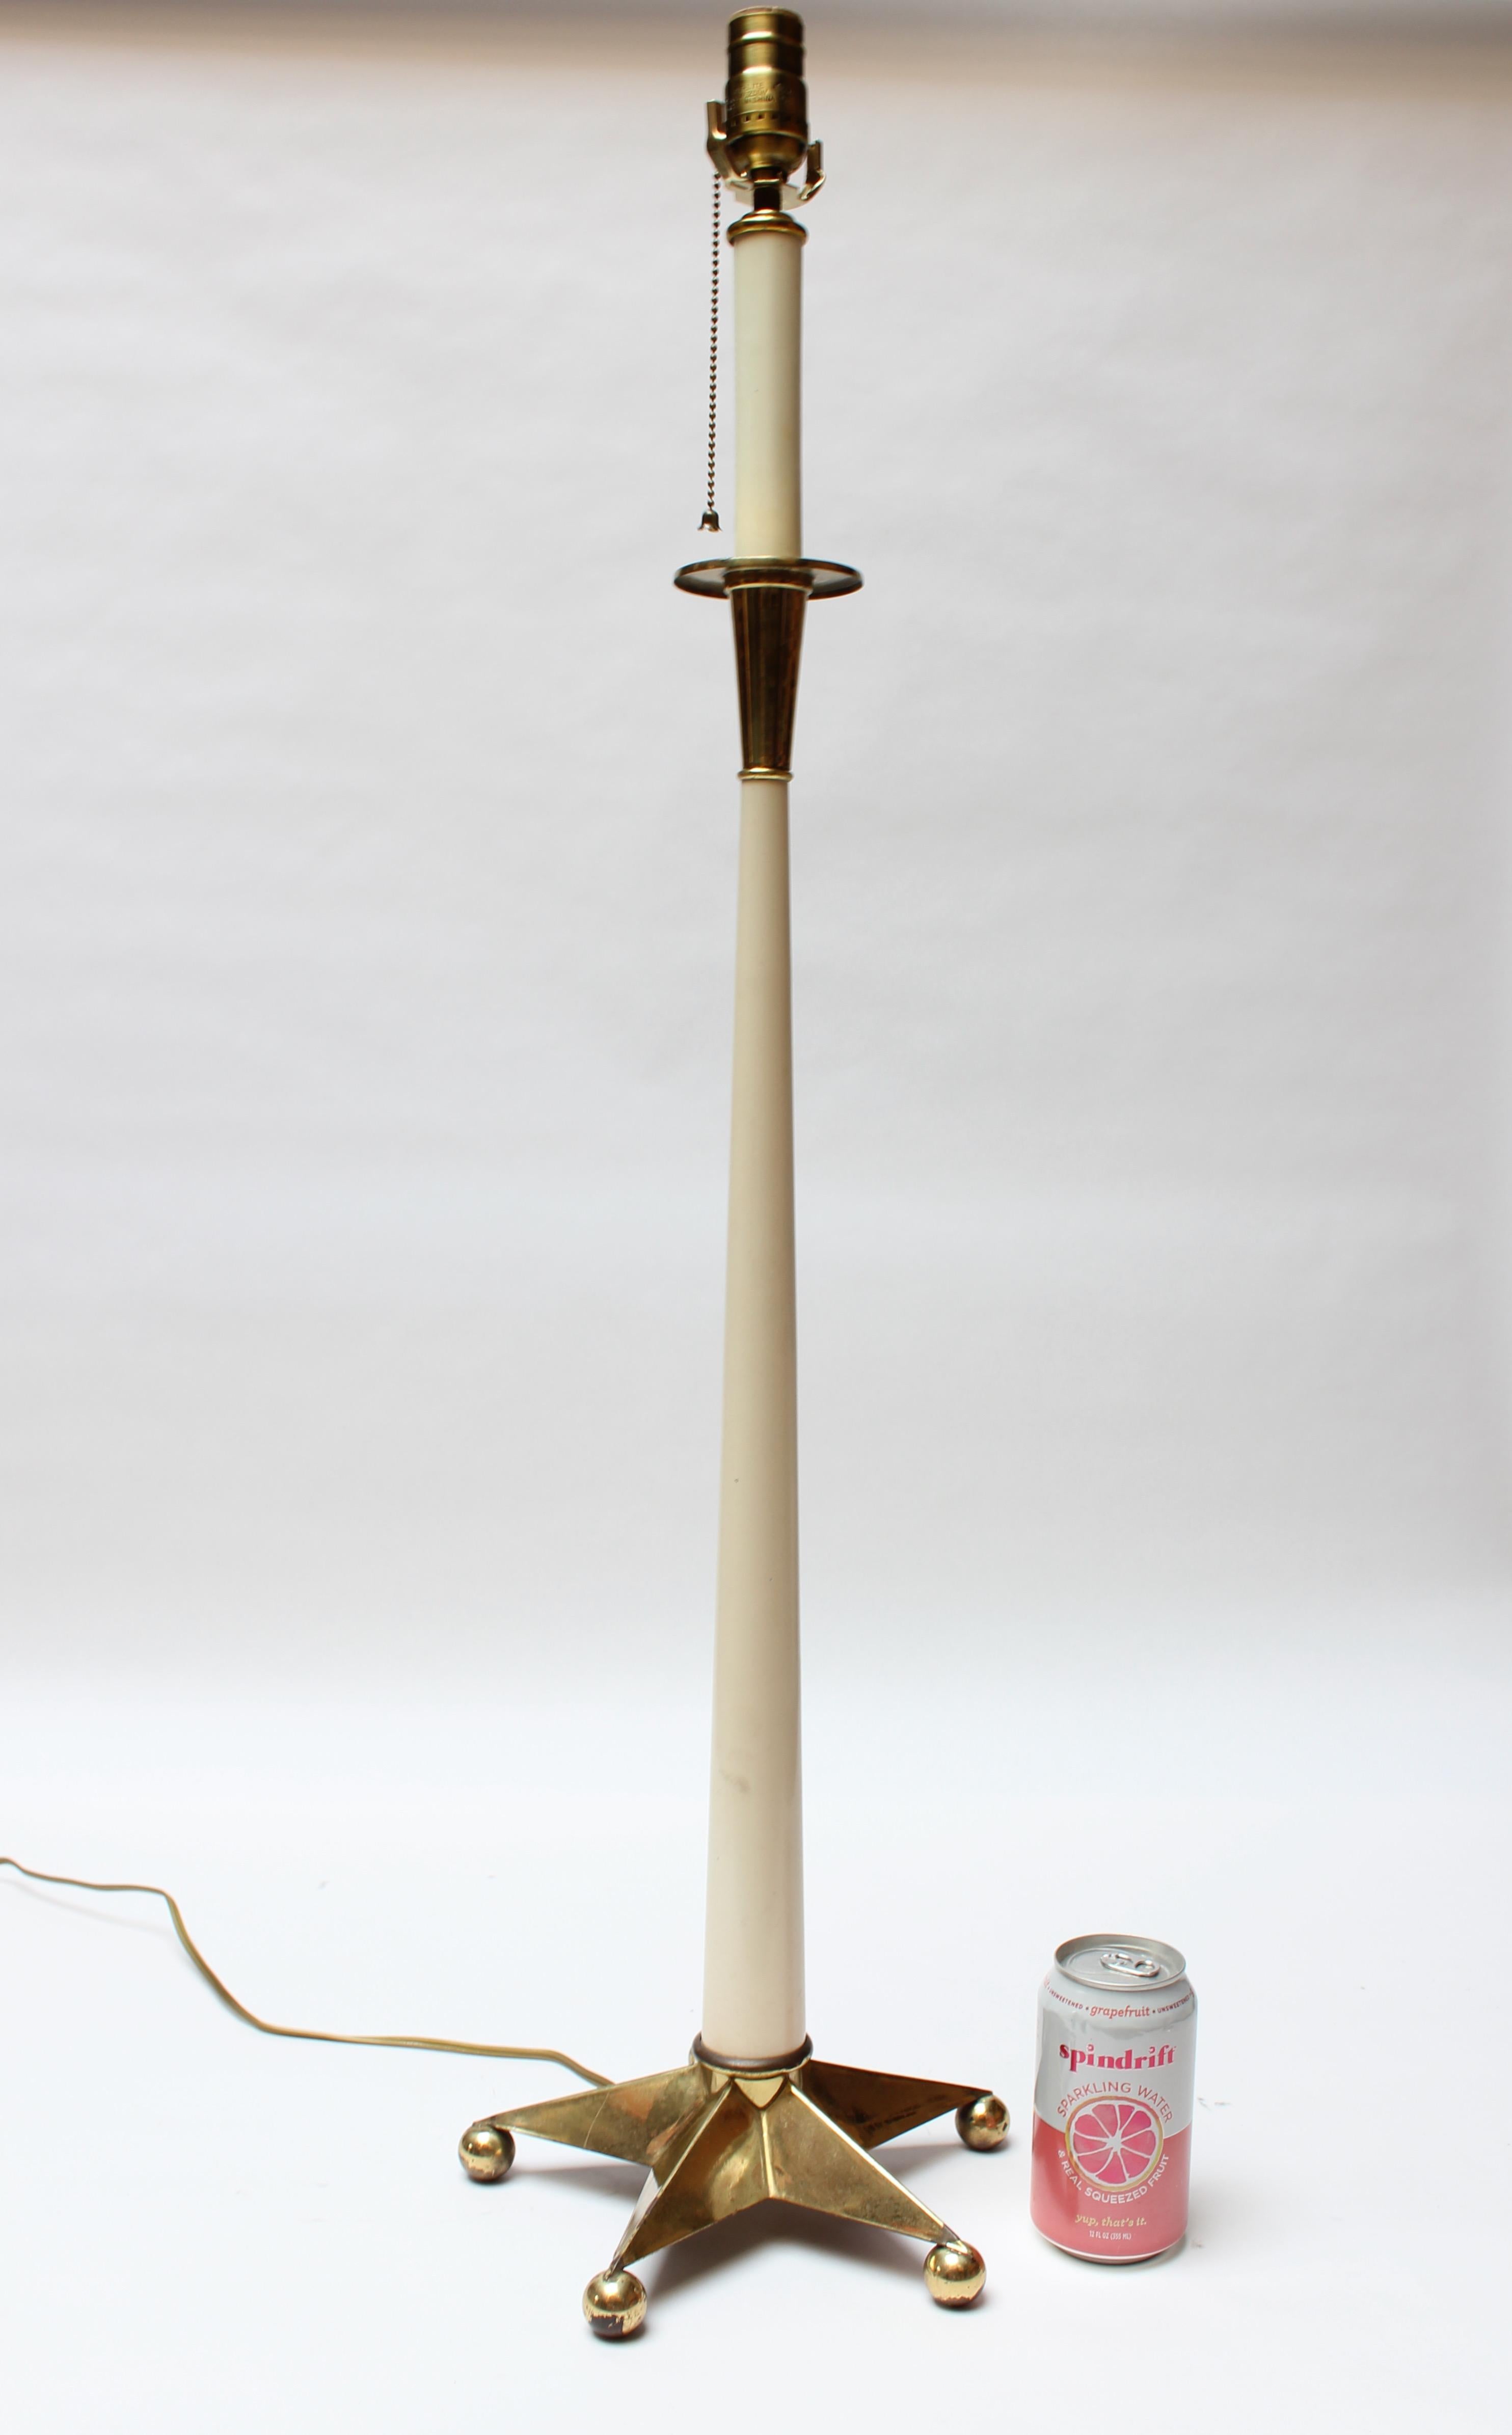 Mid-century table lamp composed of an-off white enameled metal stem with brass-plate star base and accents (ca. 1950s, USA).
Tall, statuesque form: (35.5